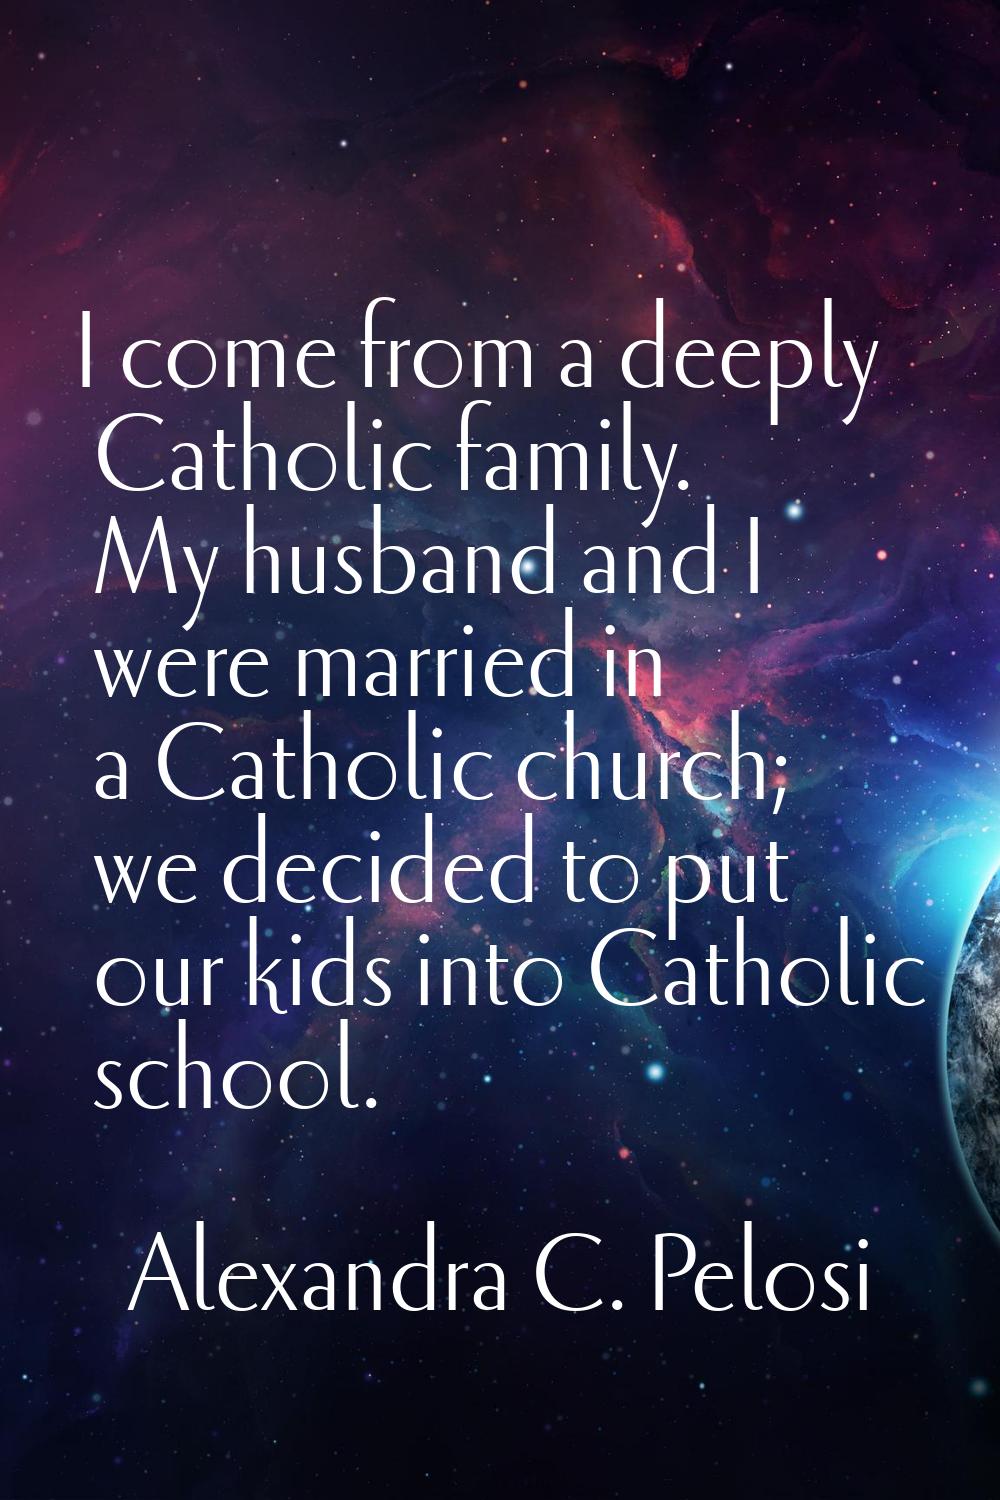 I come from a deeply Catholic family. My husband and I were married in a Catholic church; we decide